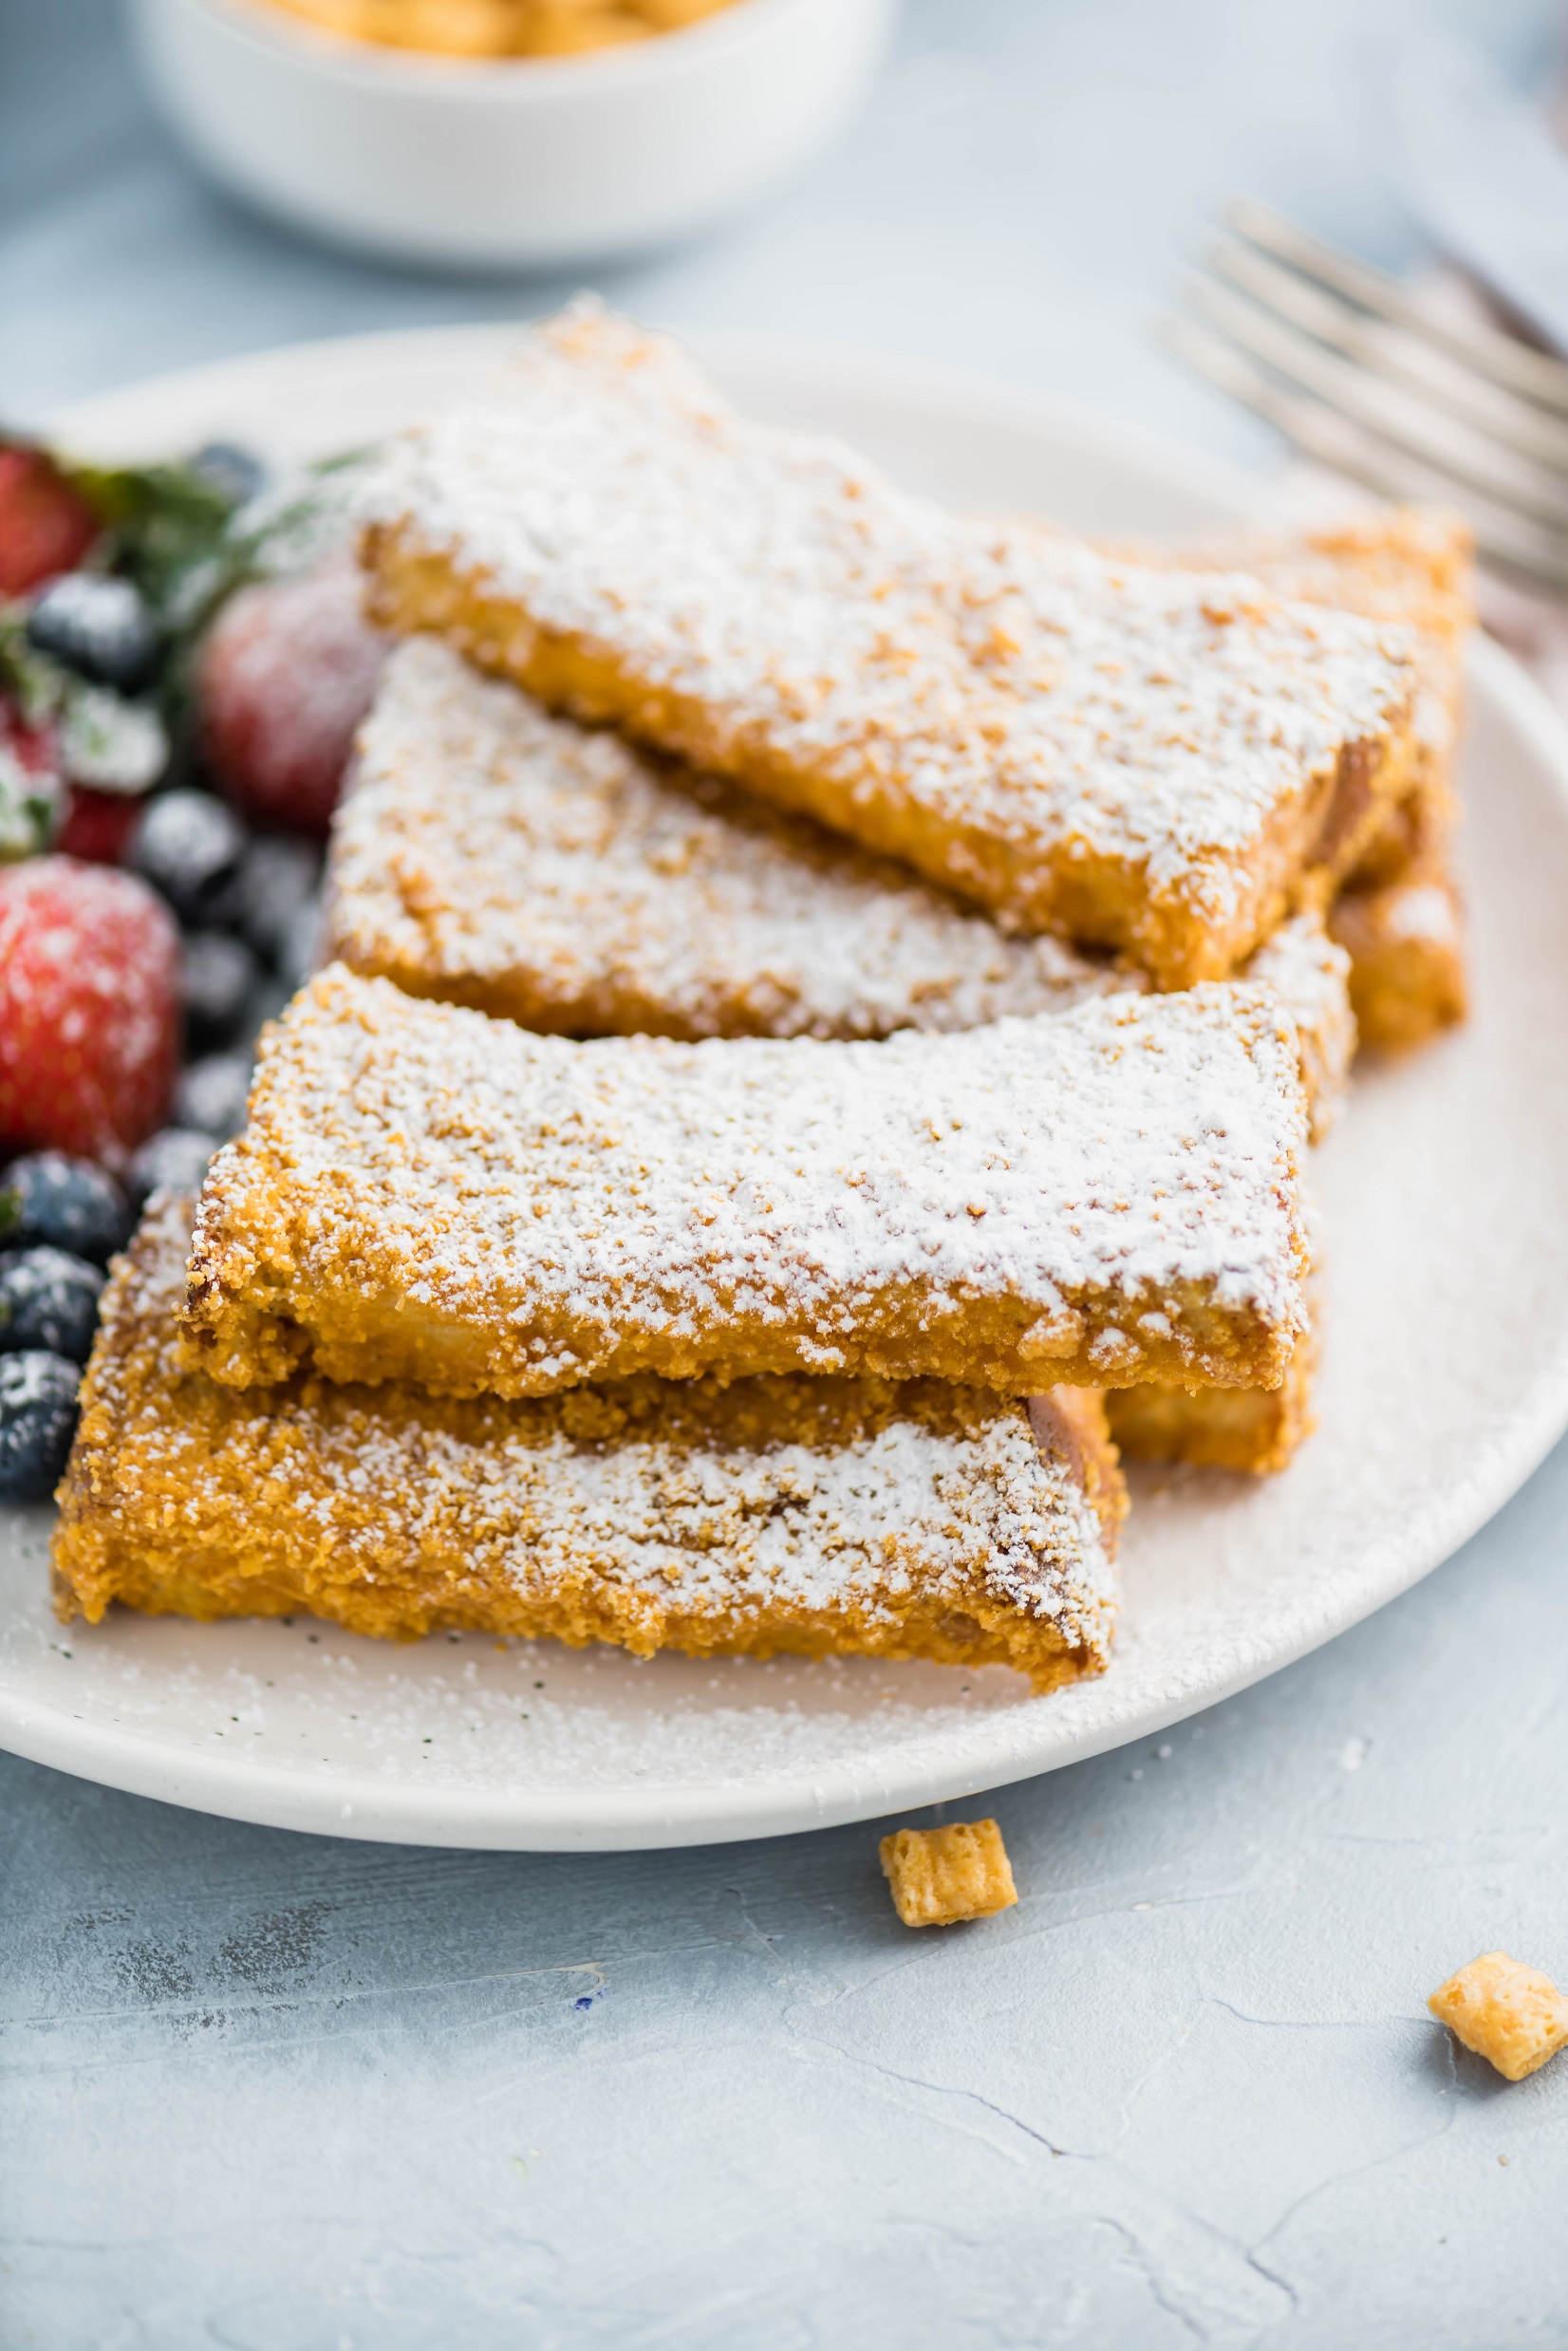 These Crunchy French Toast Sticks are sure to become a family favorite. Thick cut bread cut into sticks and coated in your favorite cereal crumbs. The perfect freezer friendly breakfast.